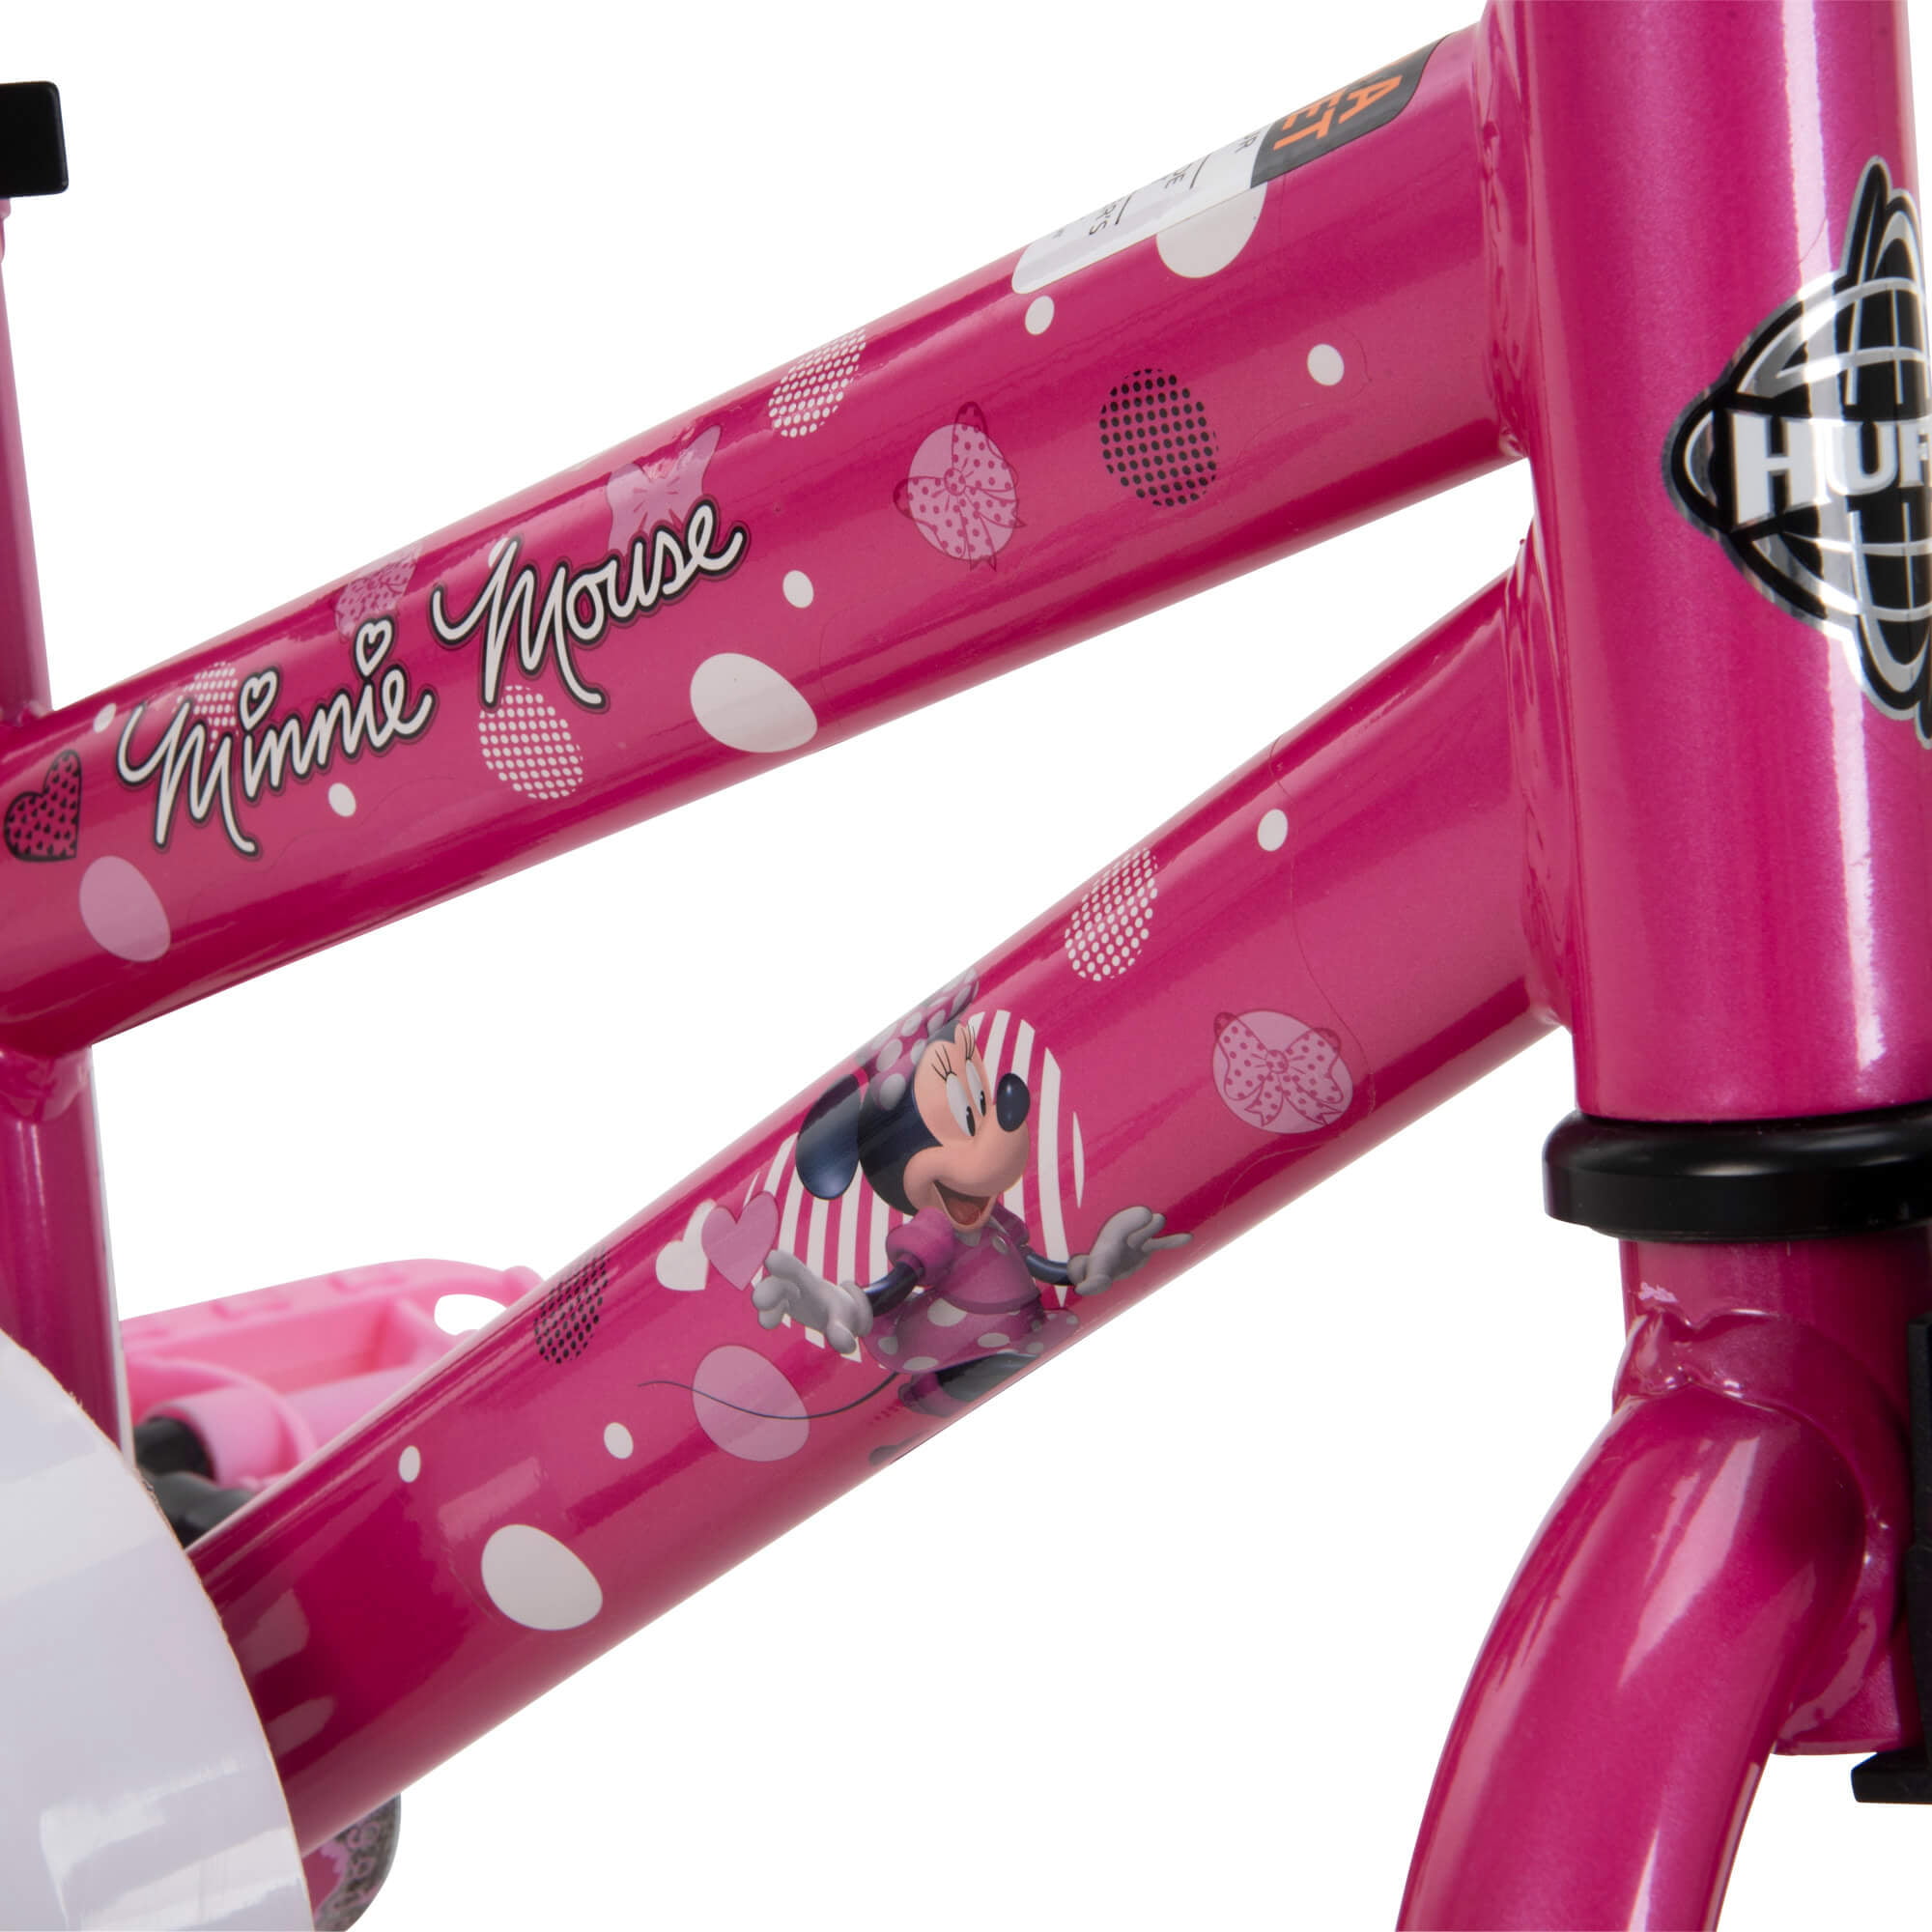 Disney 12 In. Minnie Mouse Bike for Girl's by Huffy